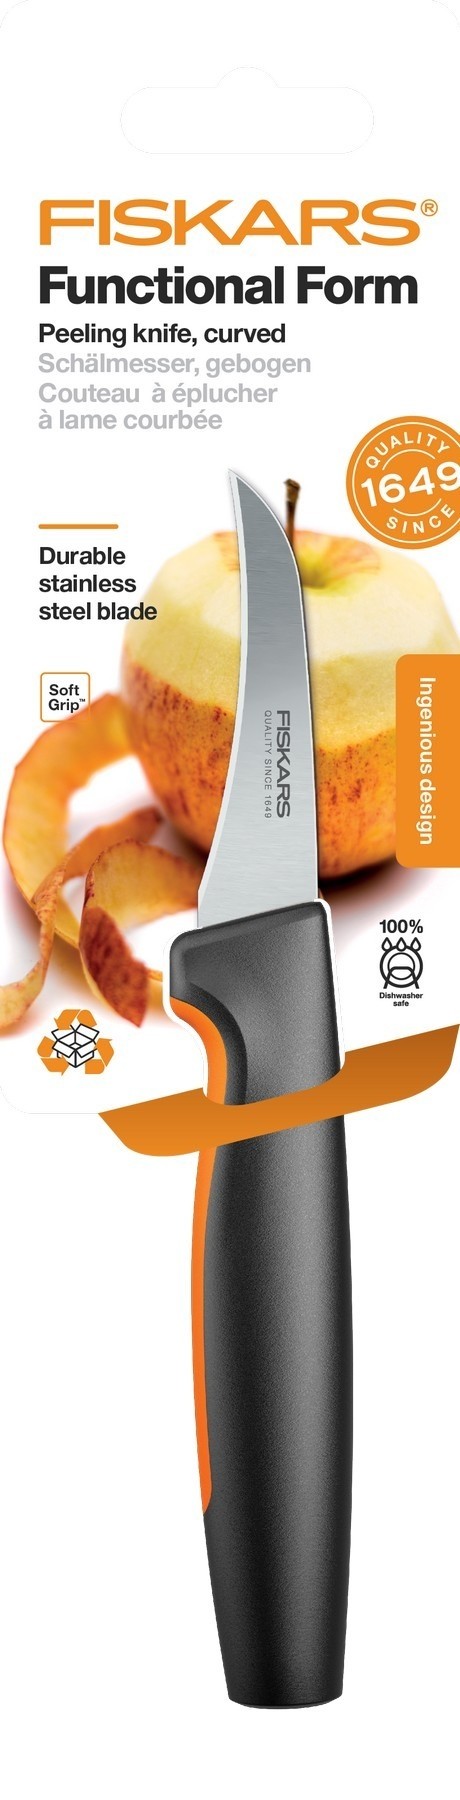 Purchase the Fiskars Functional Form Peeling Curved Knife online at smithsofloughton.com